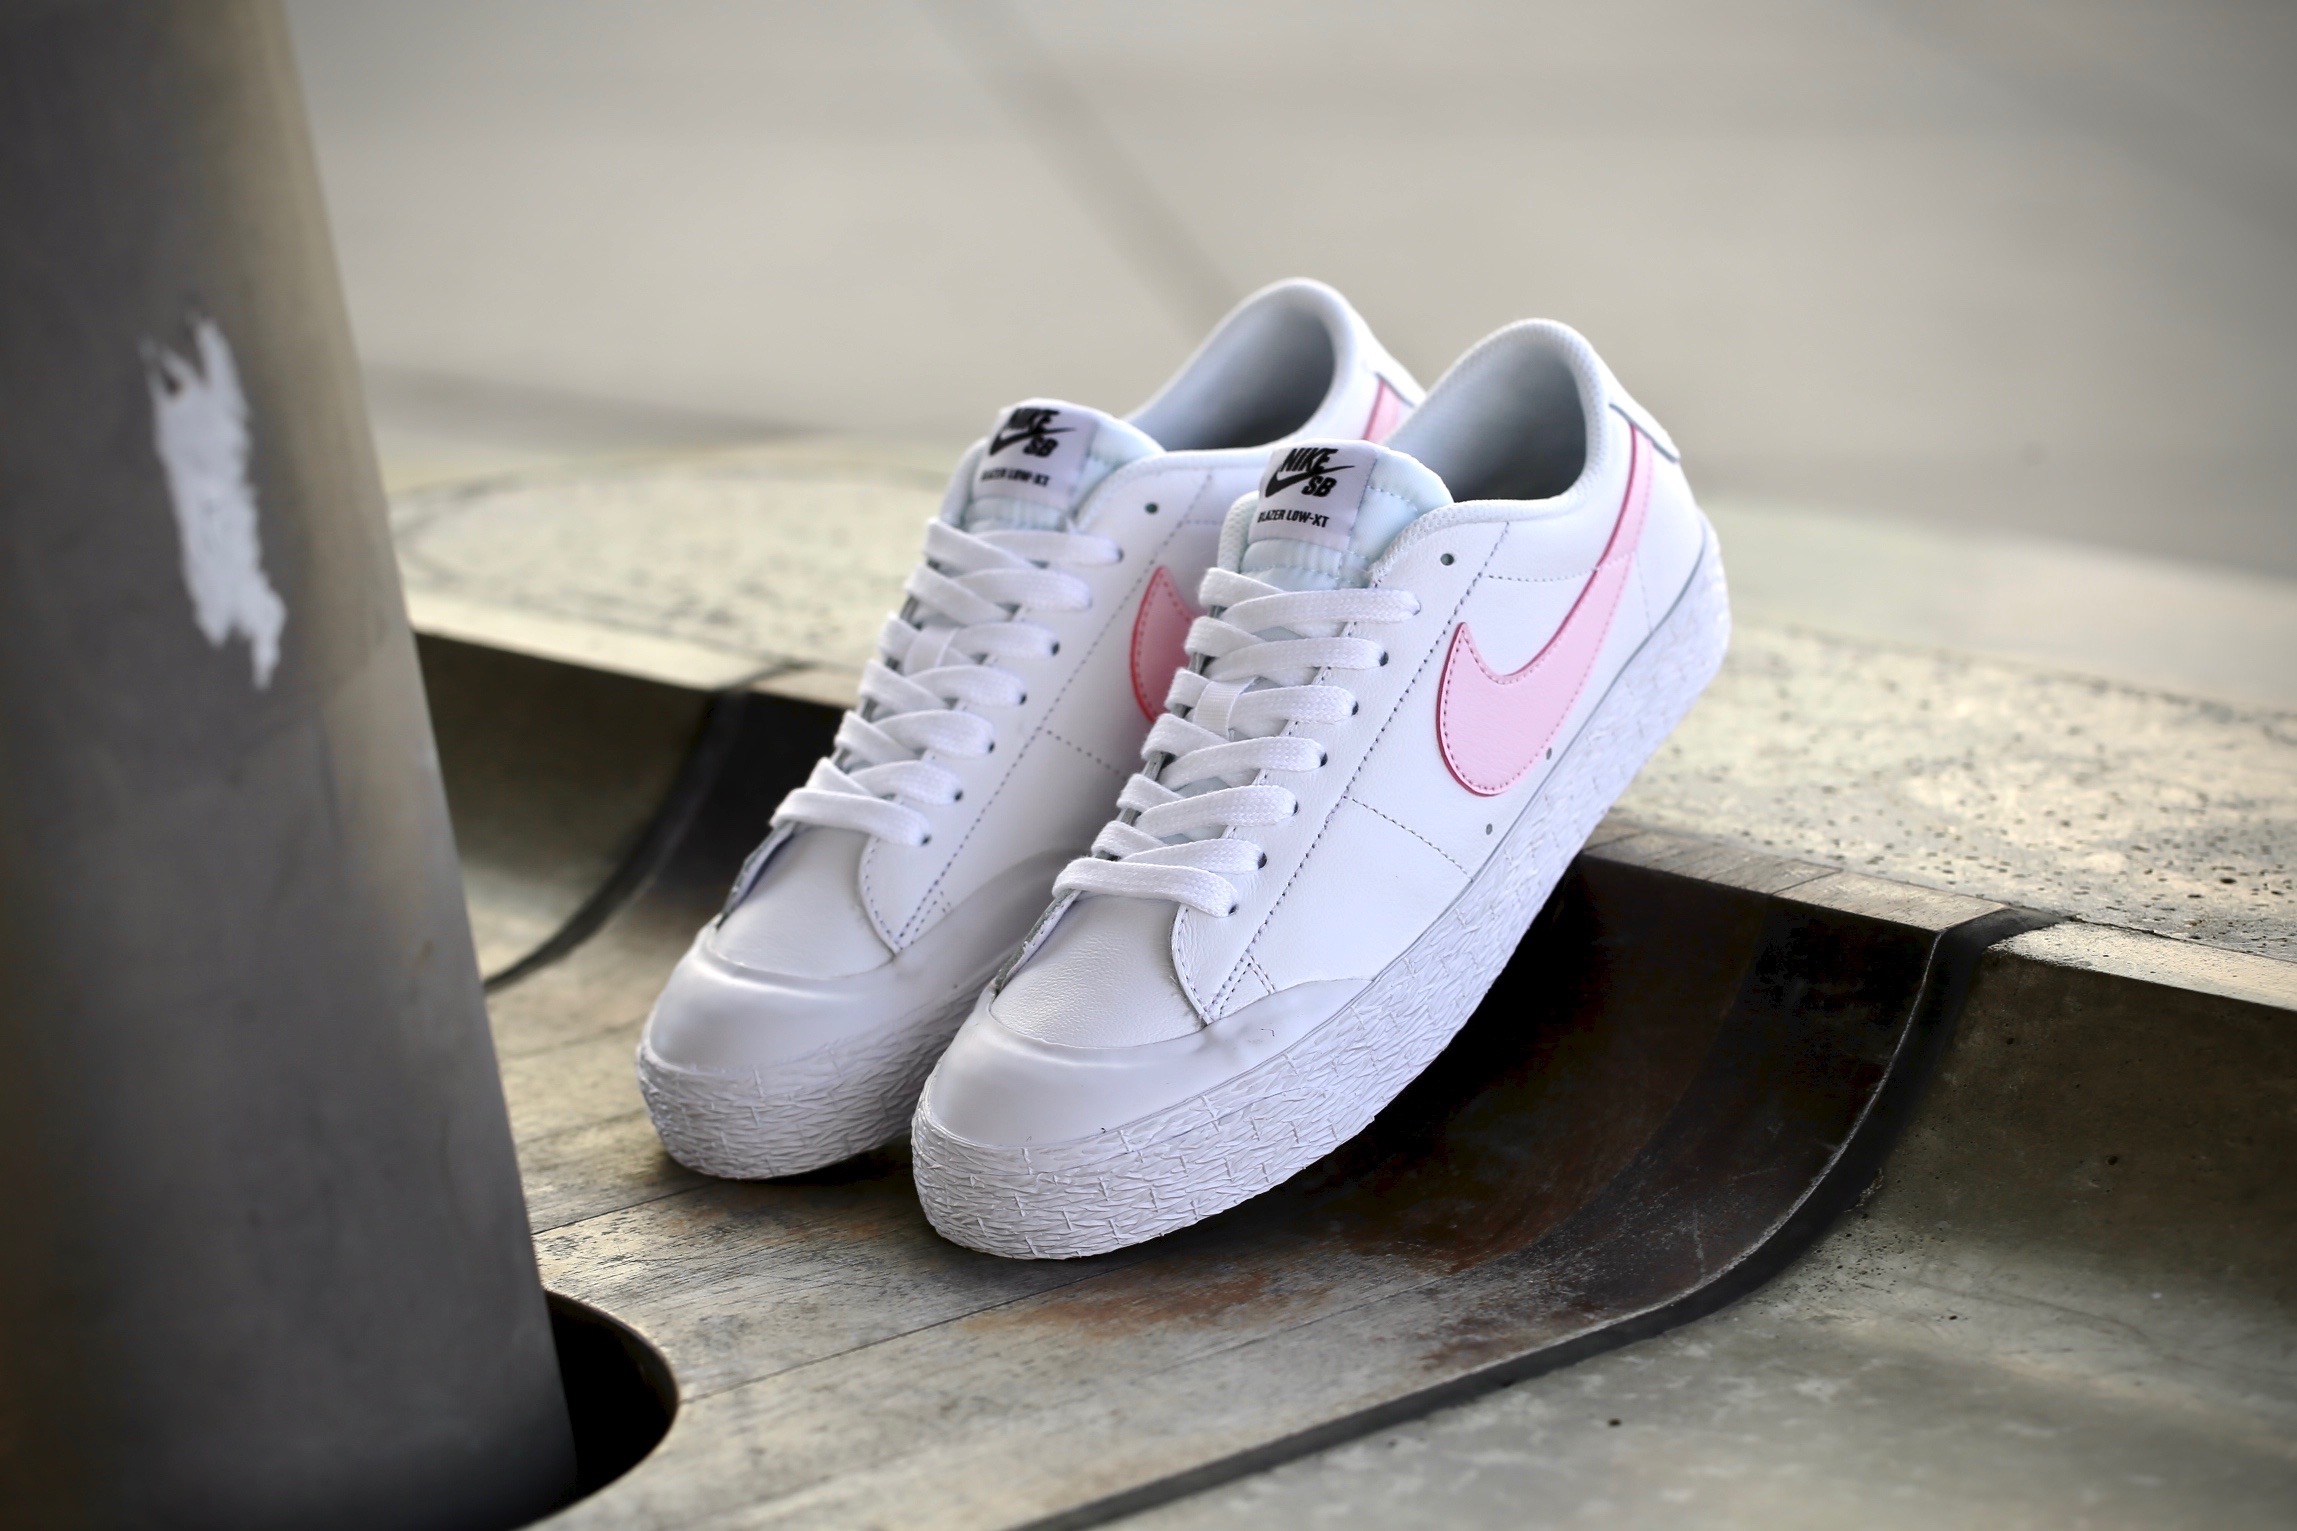 nike blazer low in white and pink